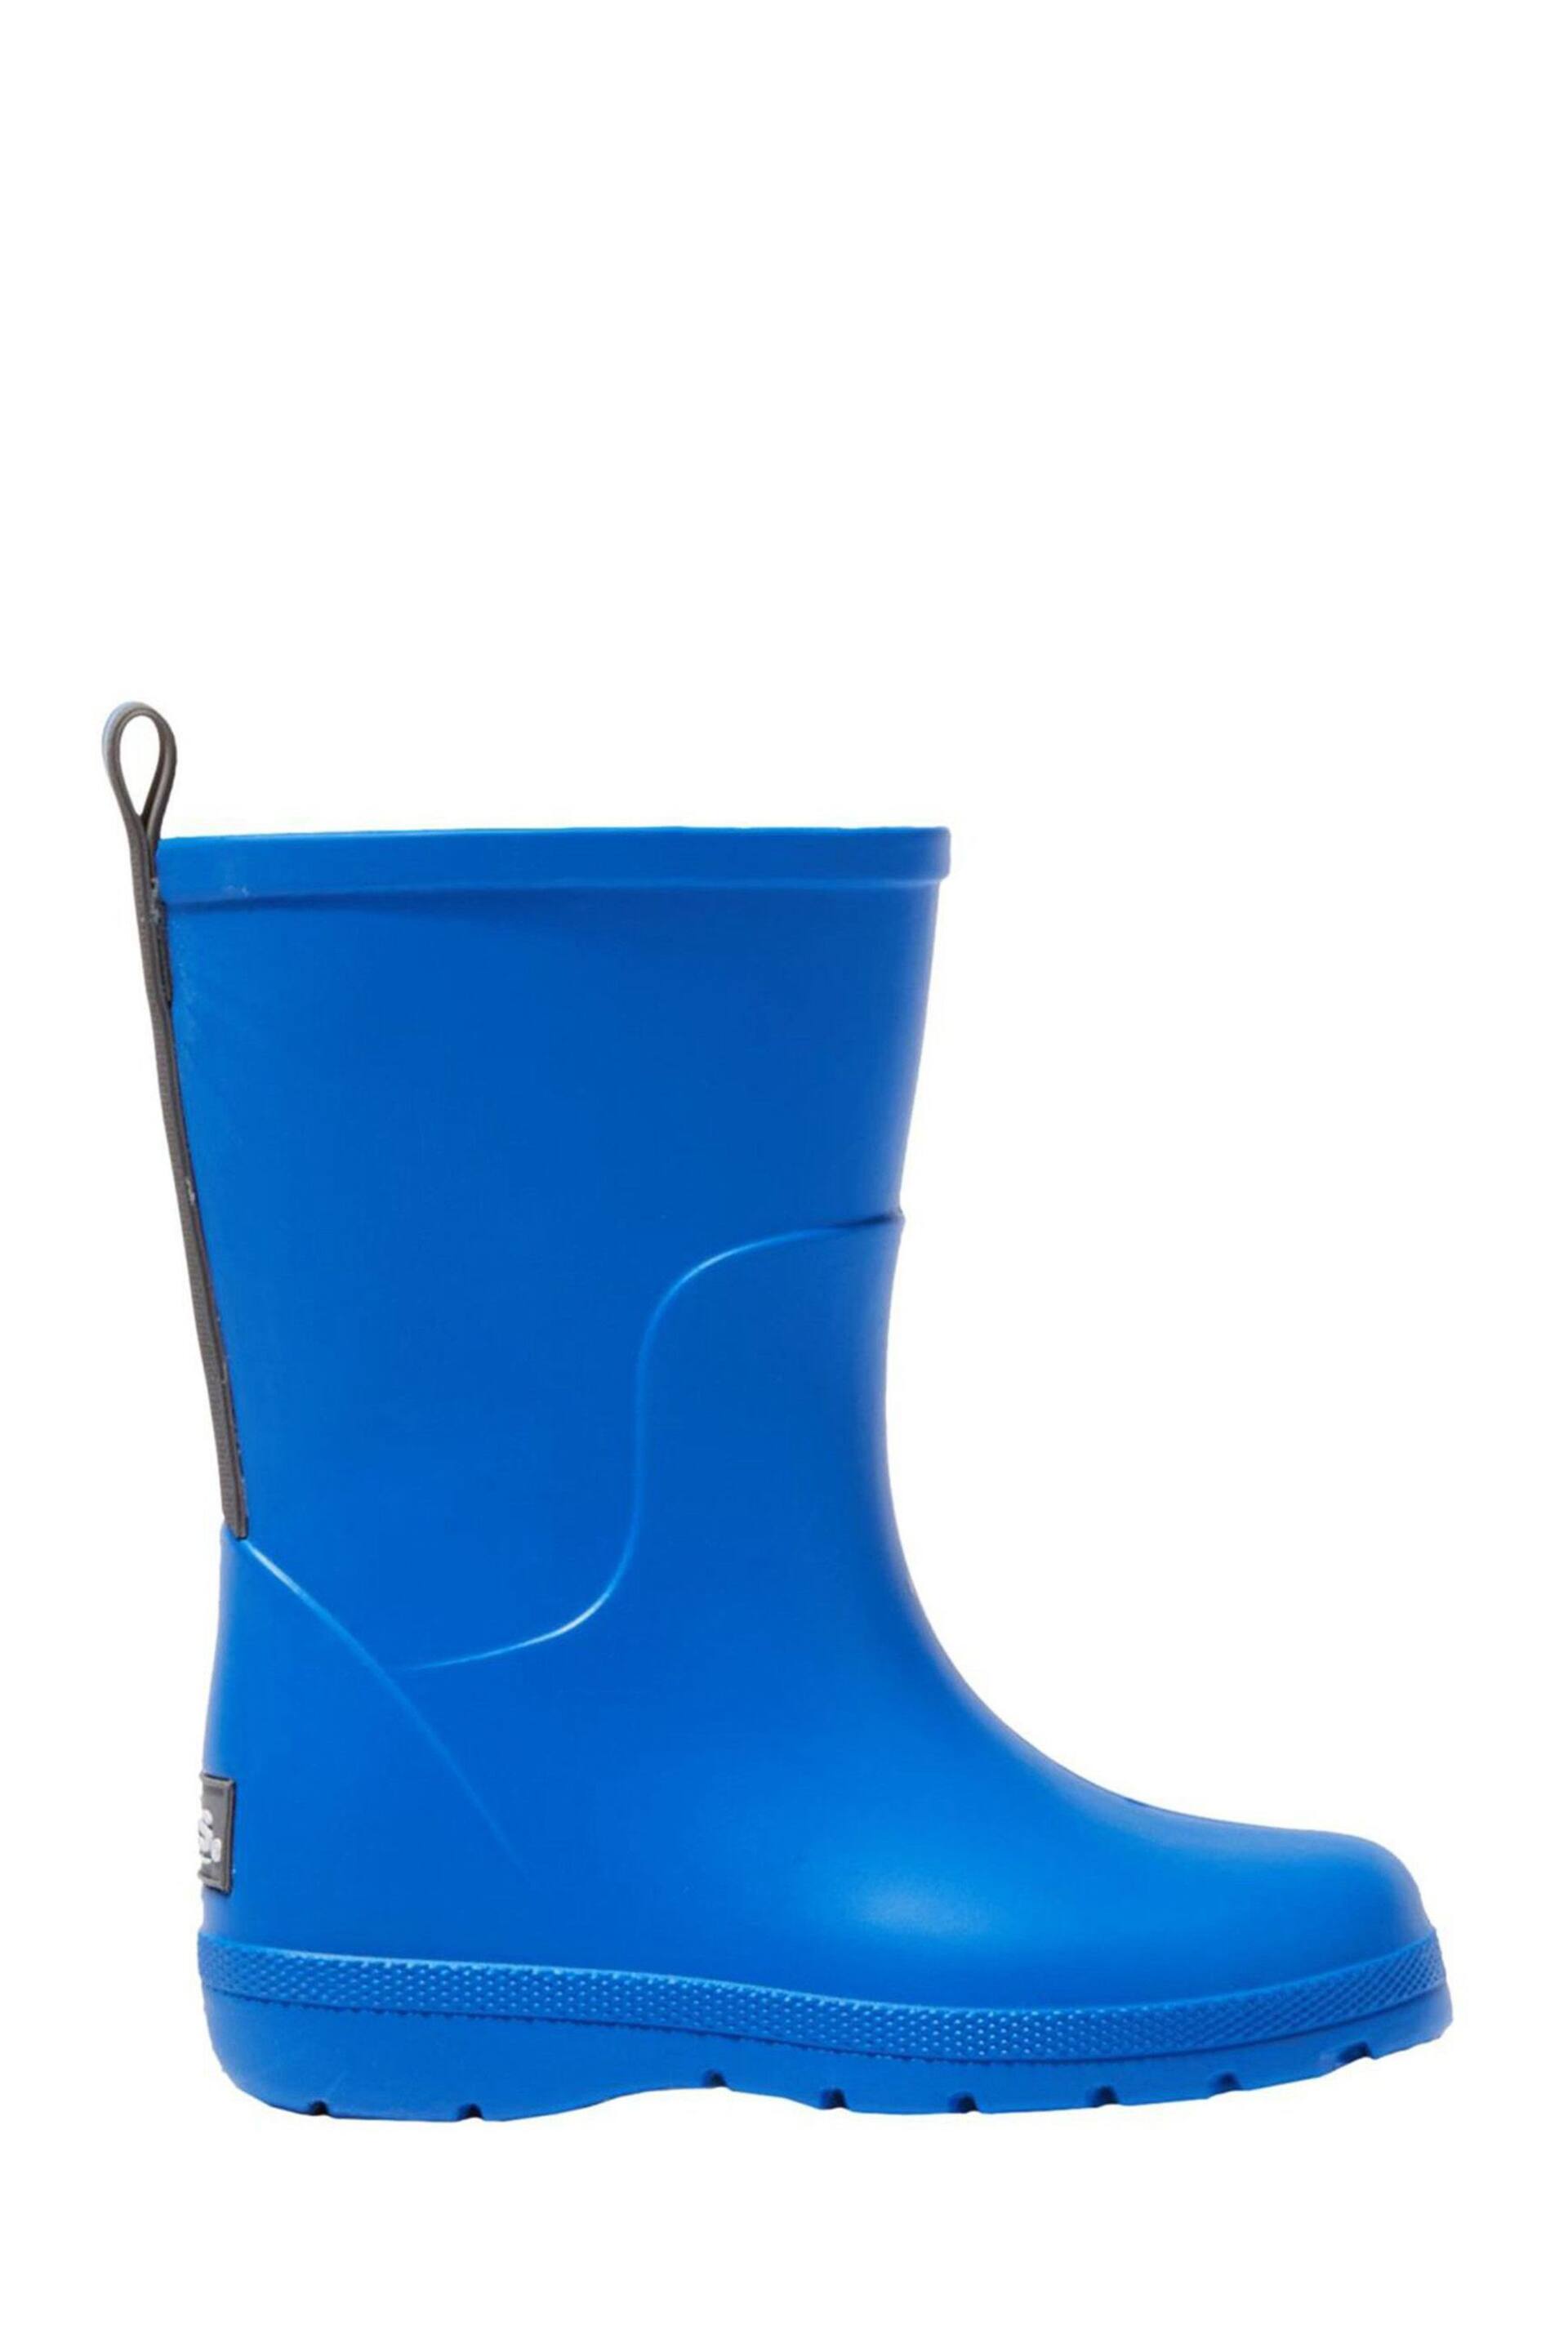 Totes Blue Childrens Charley Welly Boots - Image 2 of 7